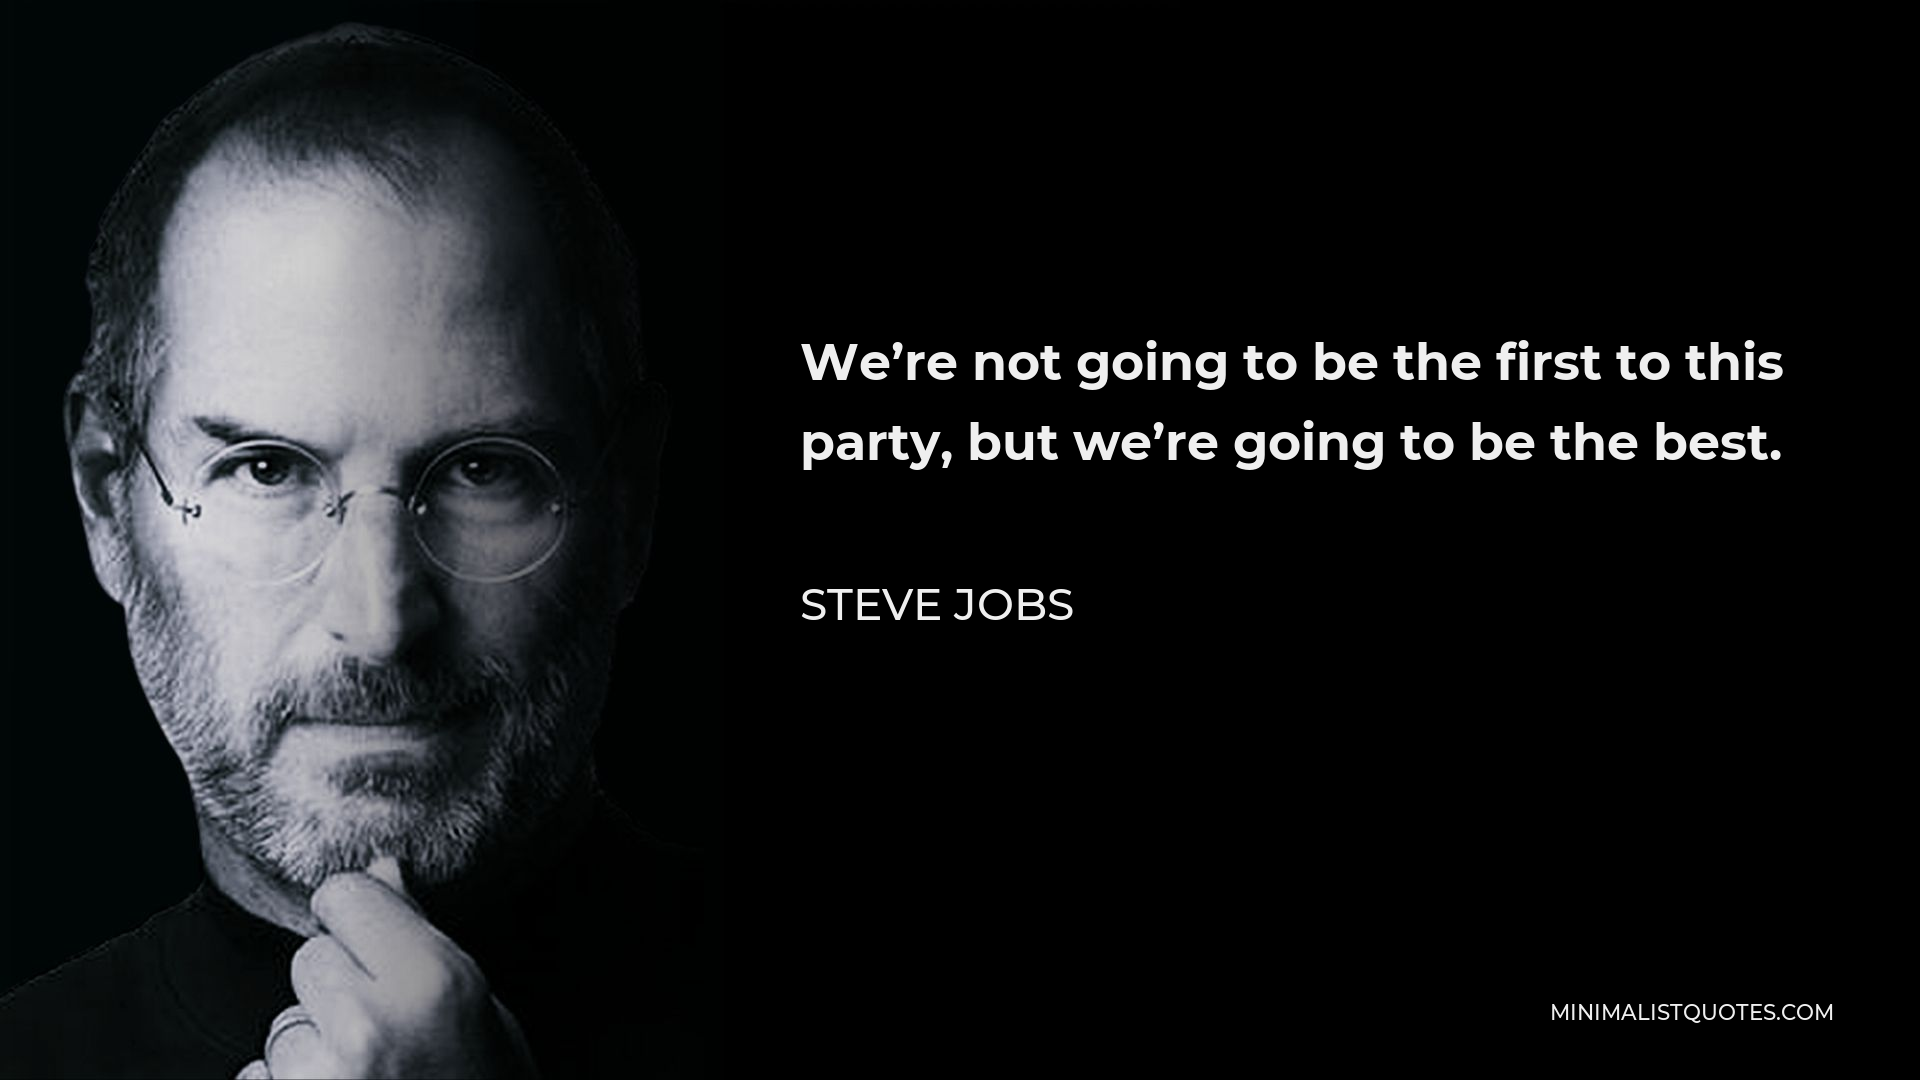 Steve Jobs Quote - We’re not going to be the first to this party, but we’re going to be the best.